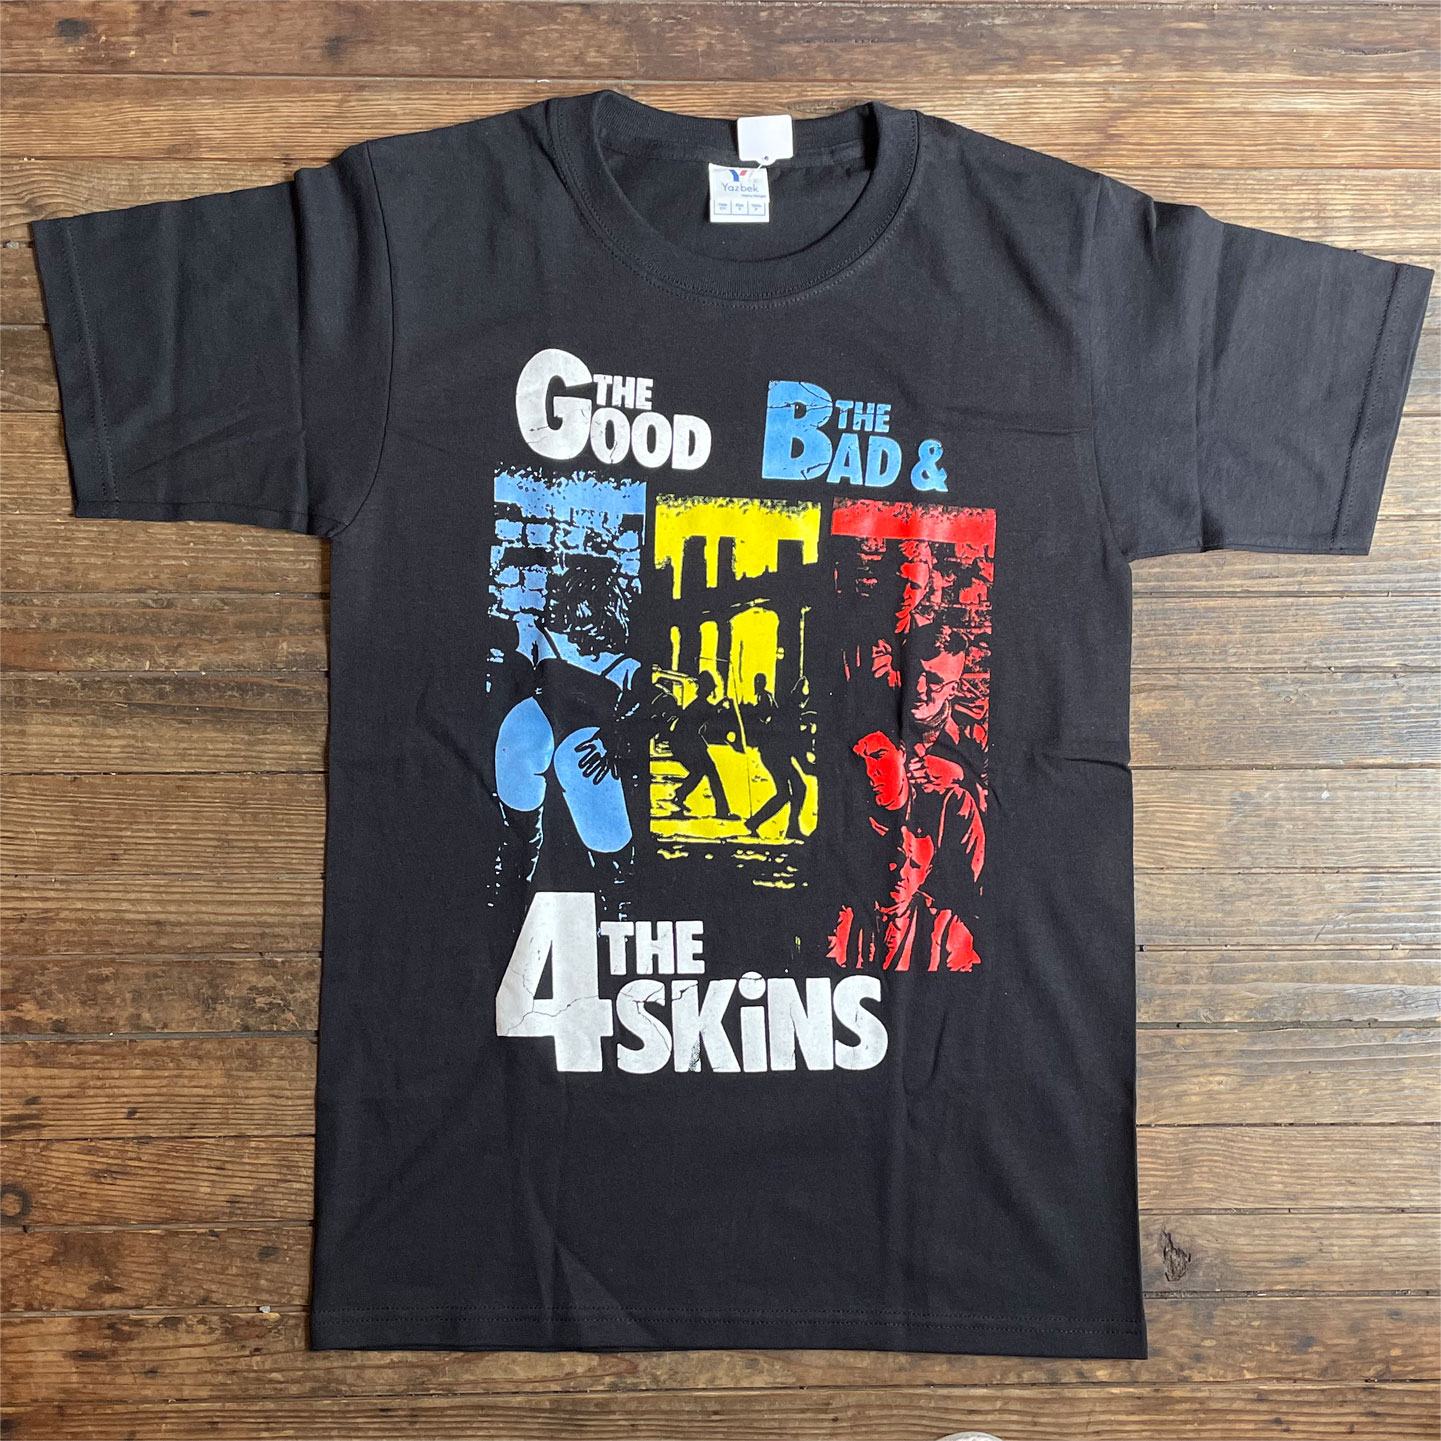 4SKINS Tシャツ The Good, The Bad & The 4 Skins